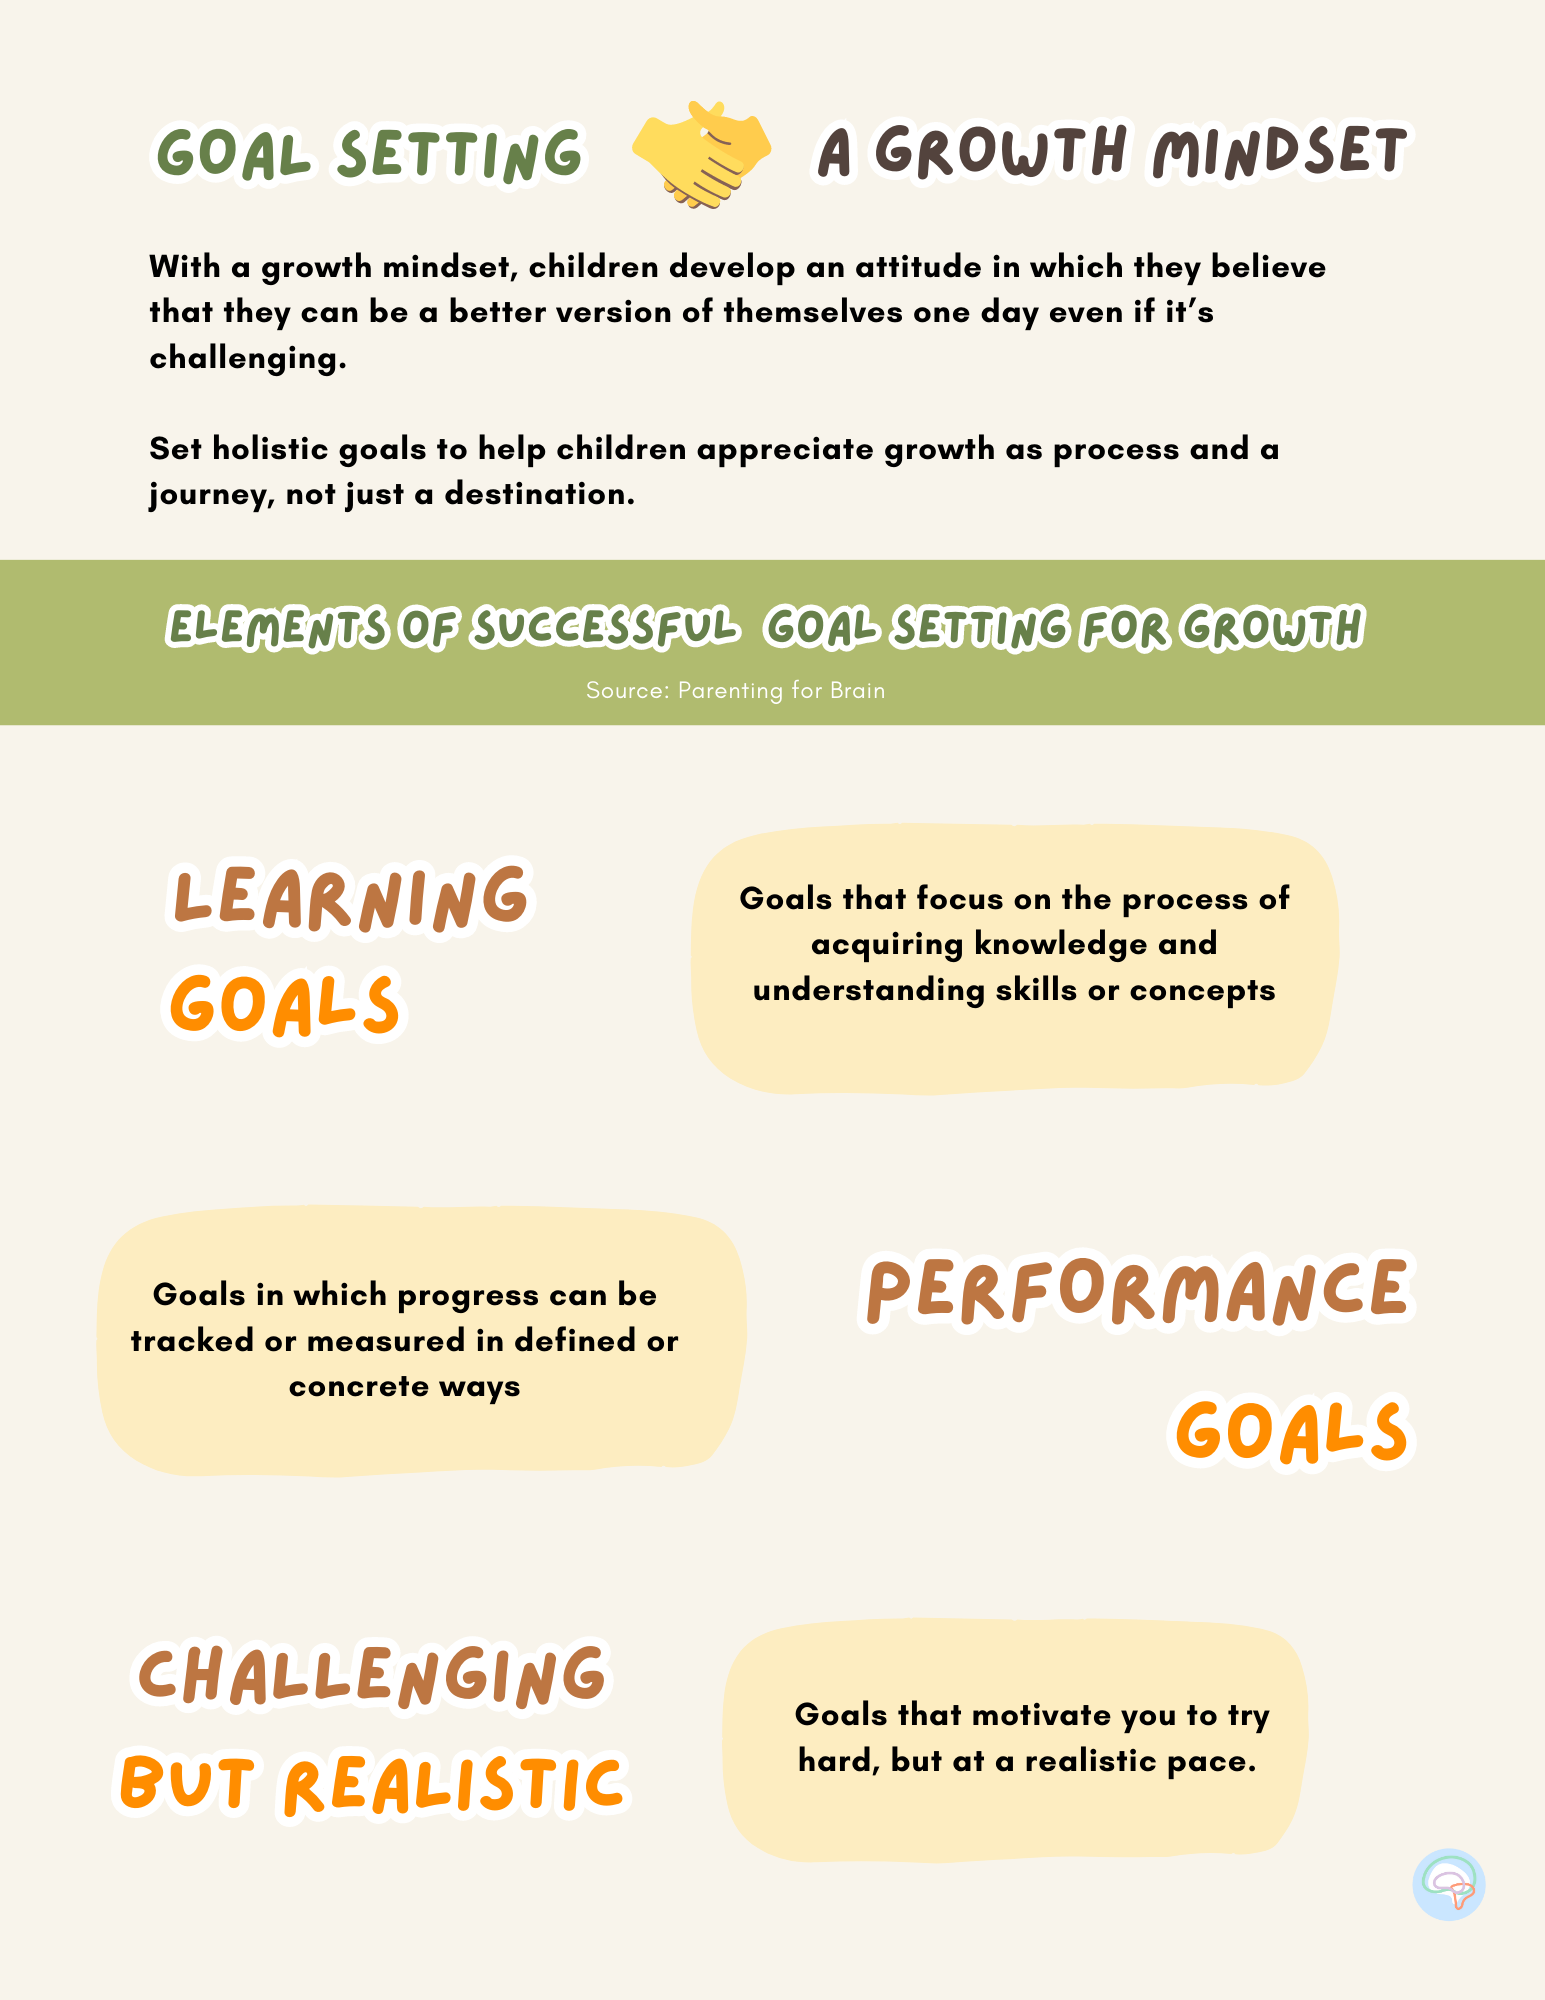 Putting goal setting at the forefront of learning